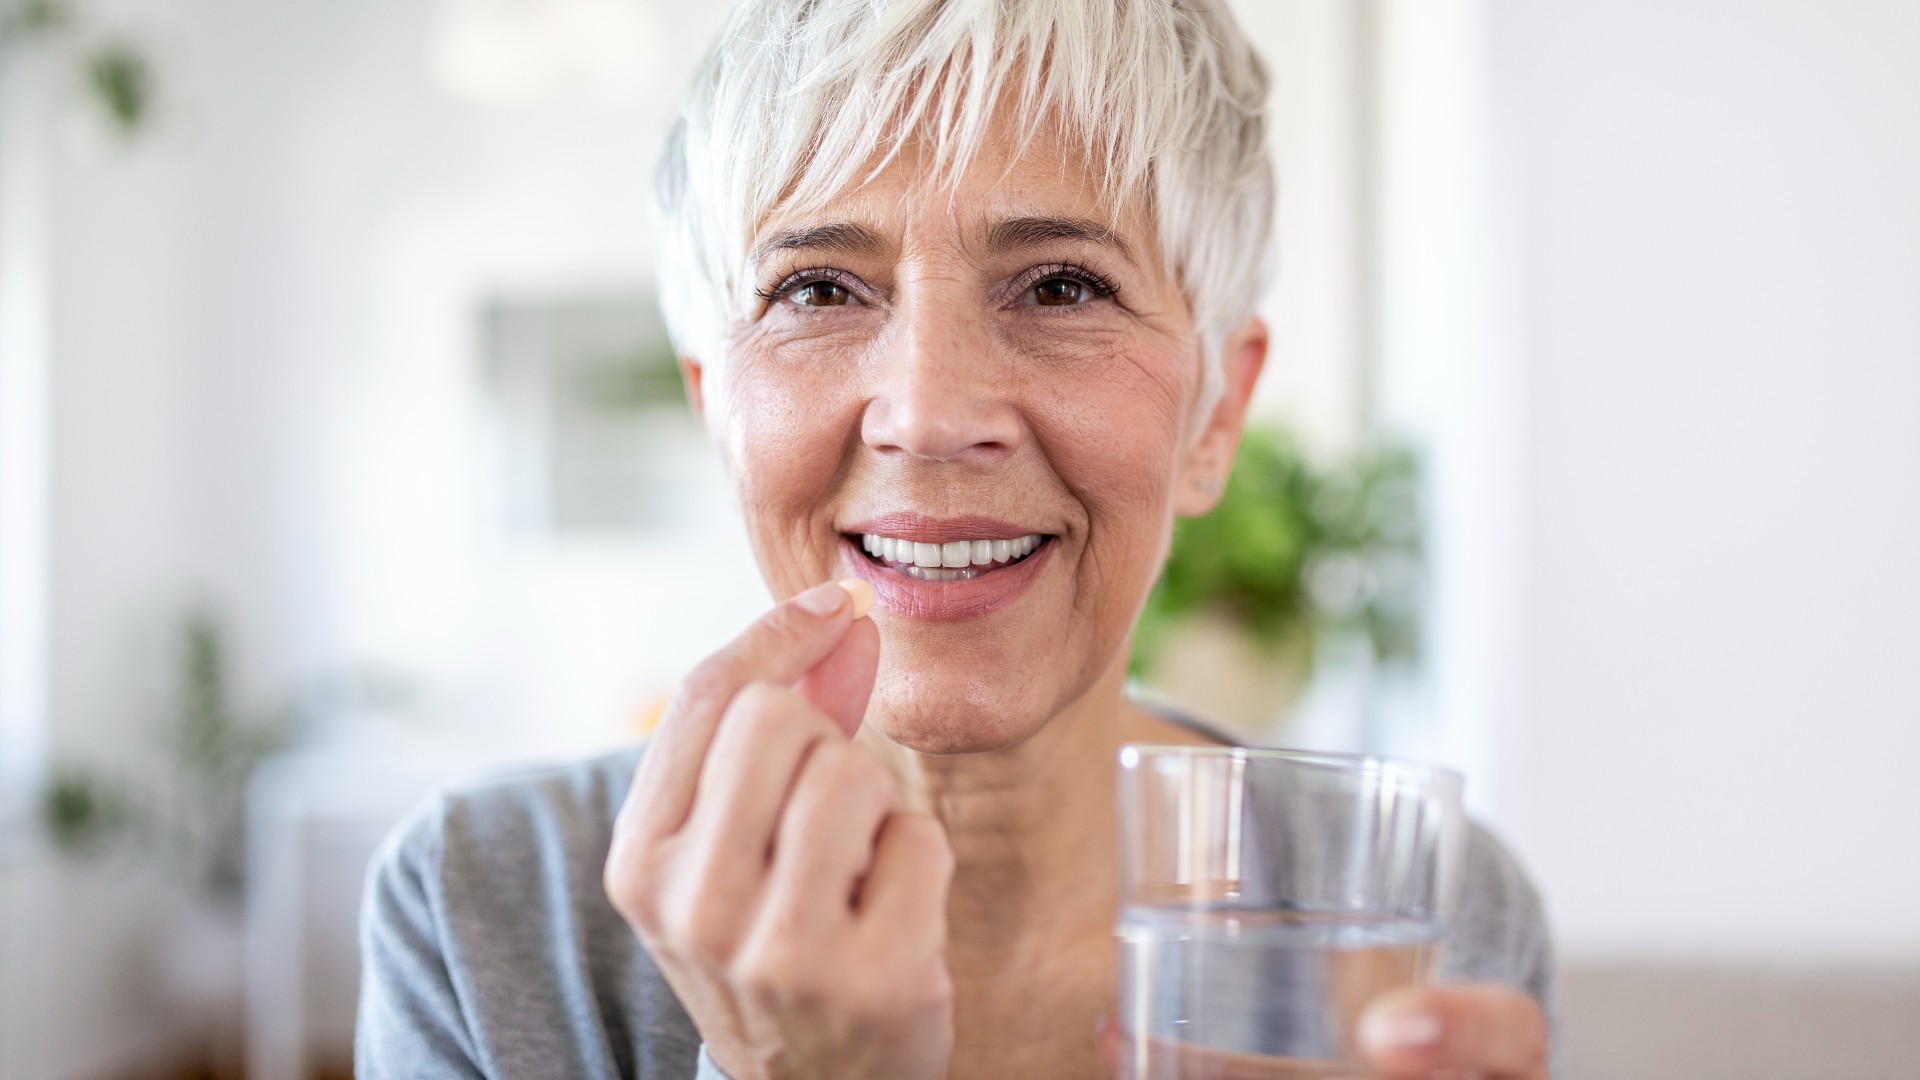 Smiling happy healthy middle aged 50s woman holding glass of water taking dietary supplement vitamin pill